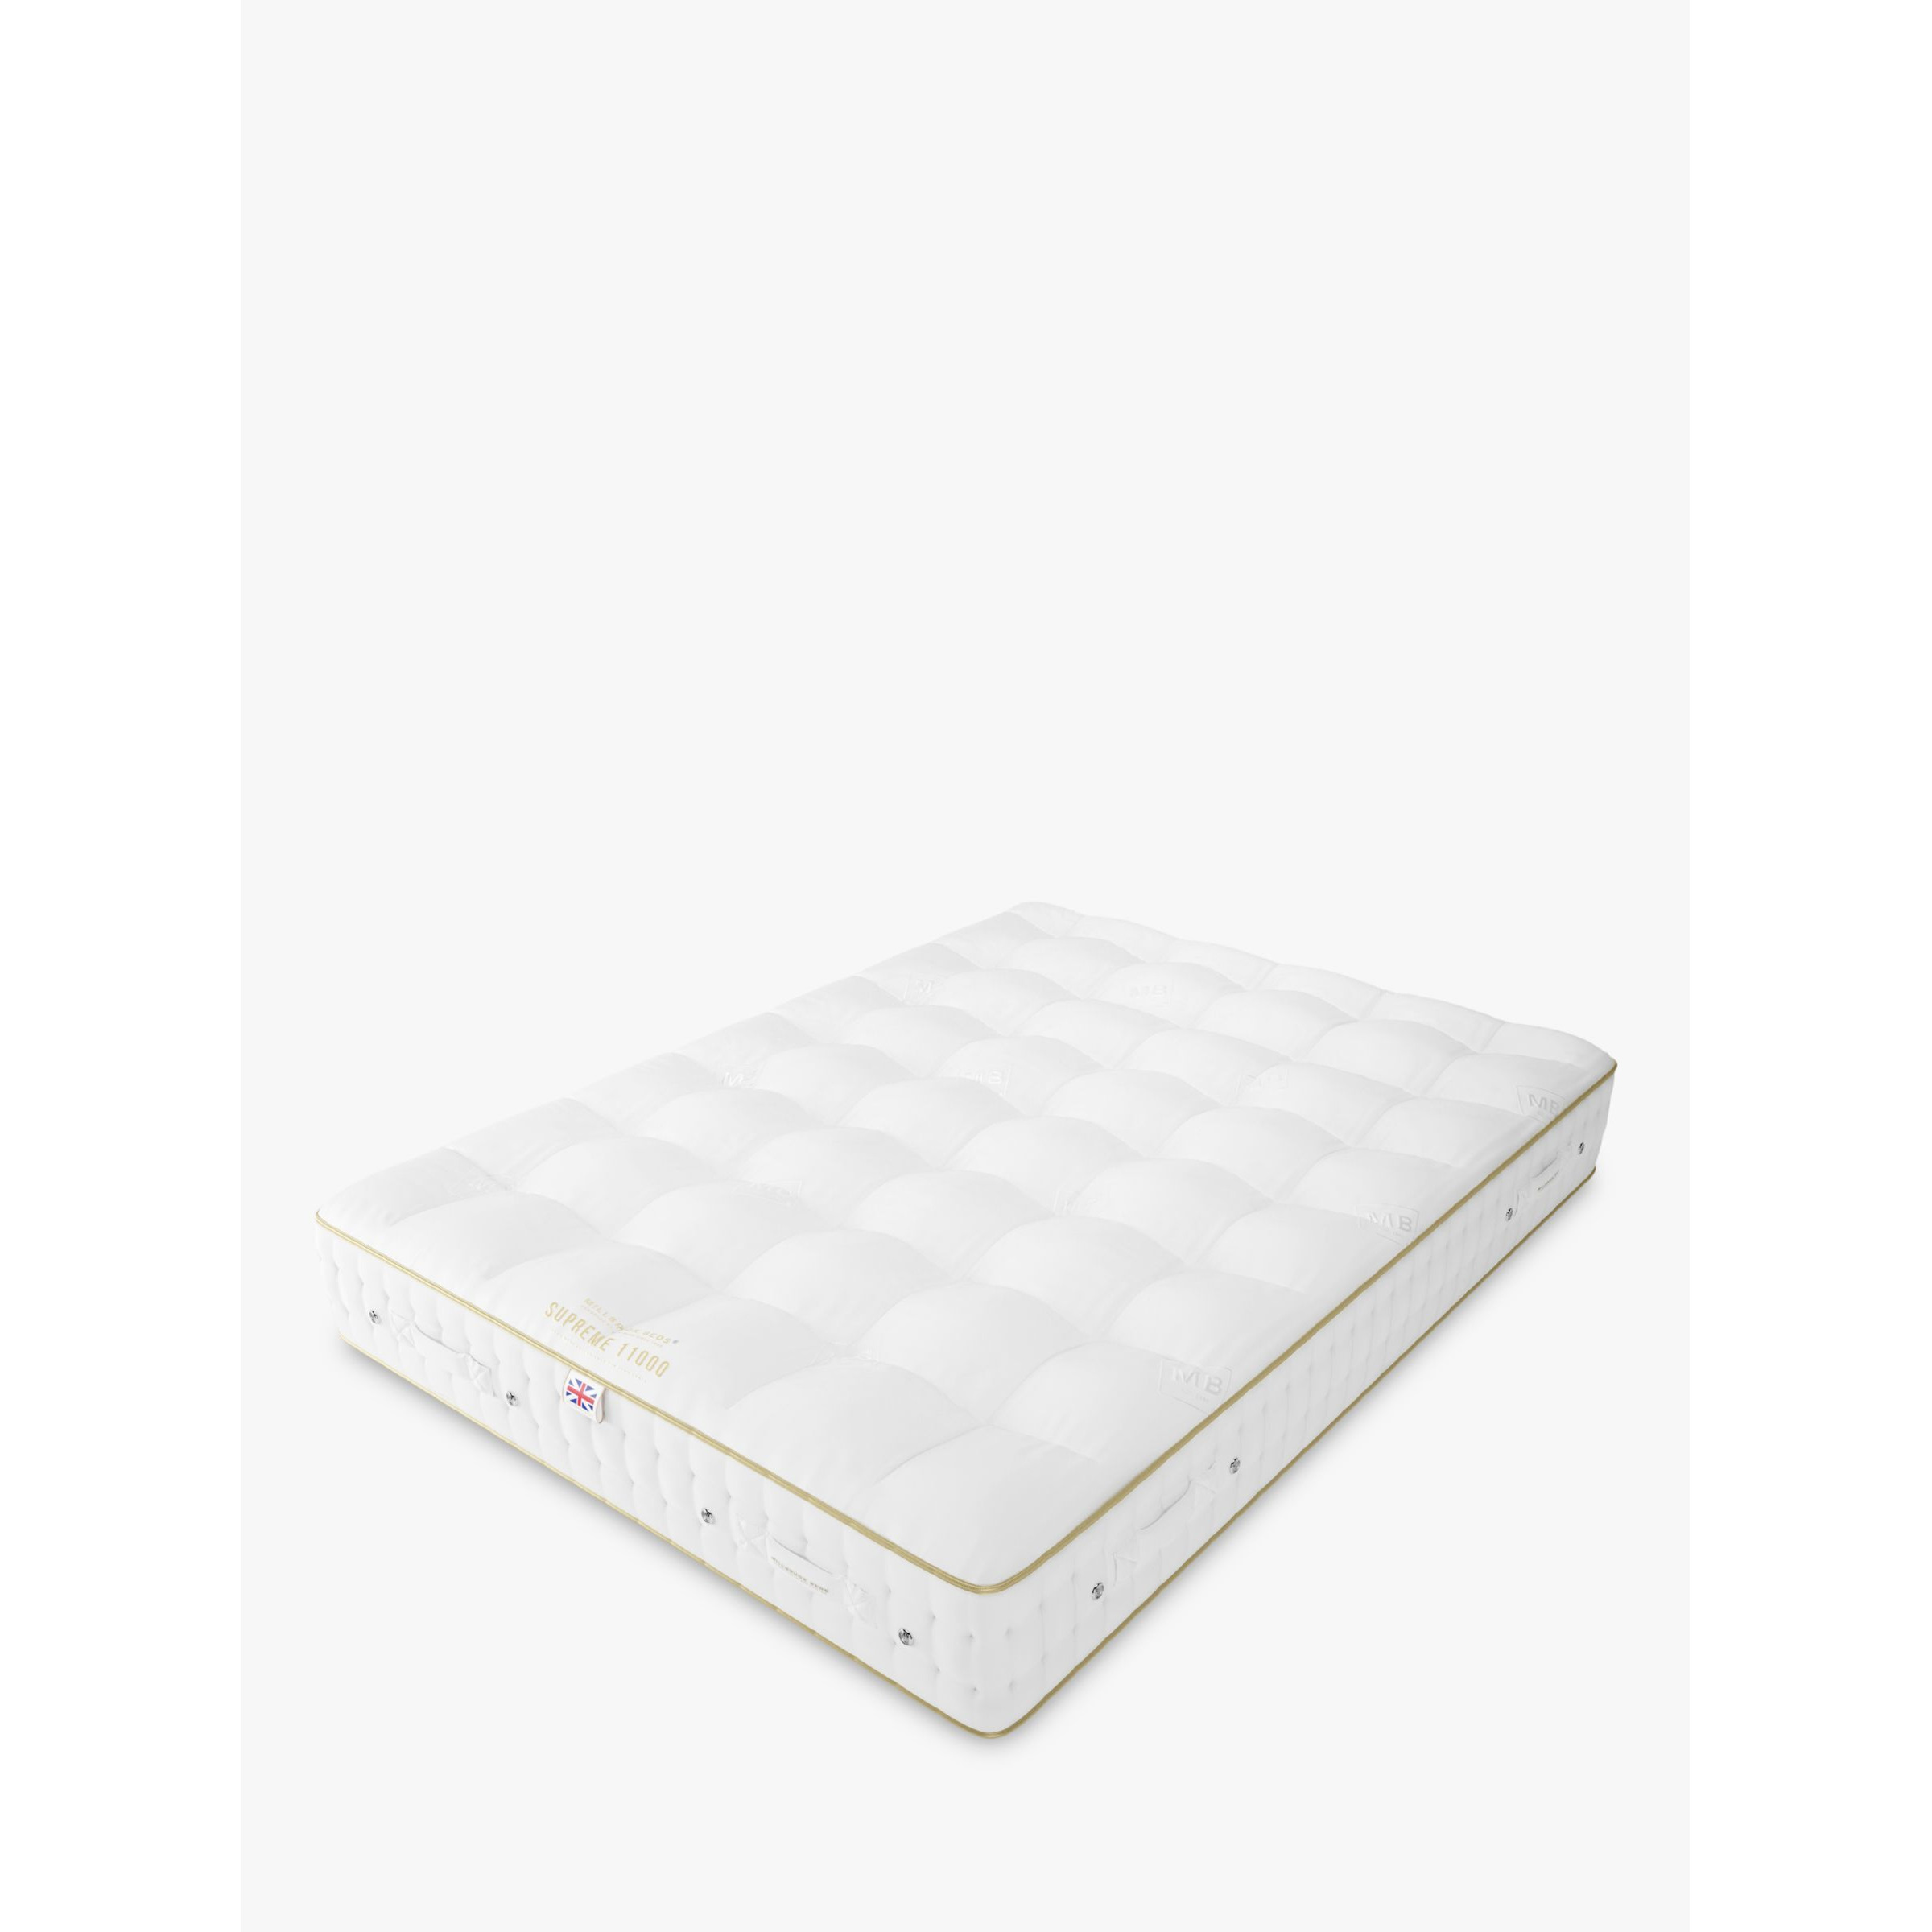 Millbrook Beds Supreme Collection 11000 Mattress, Firm Tension, Double - image 1